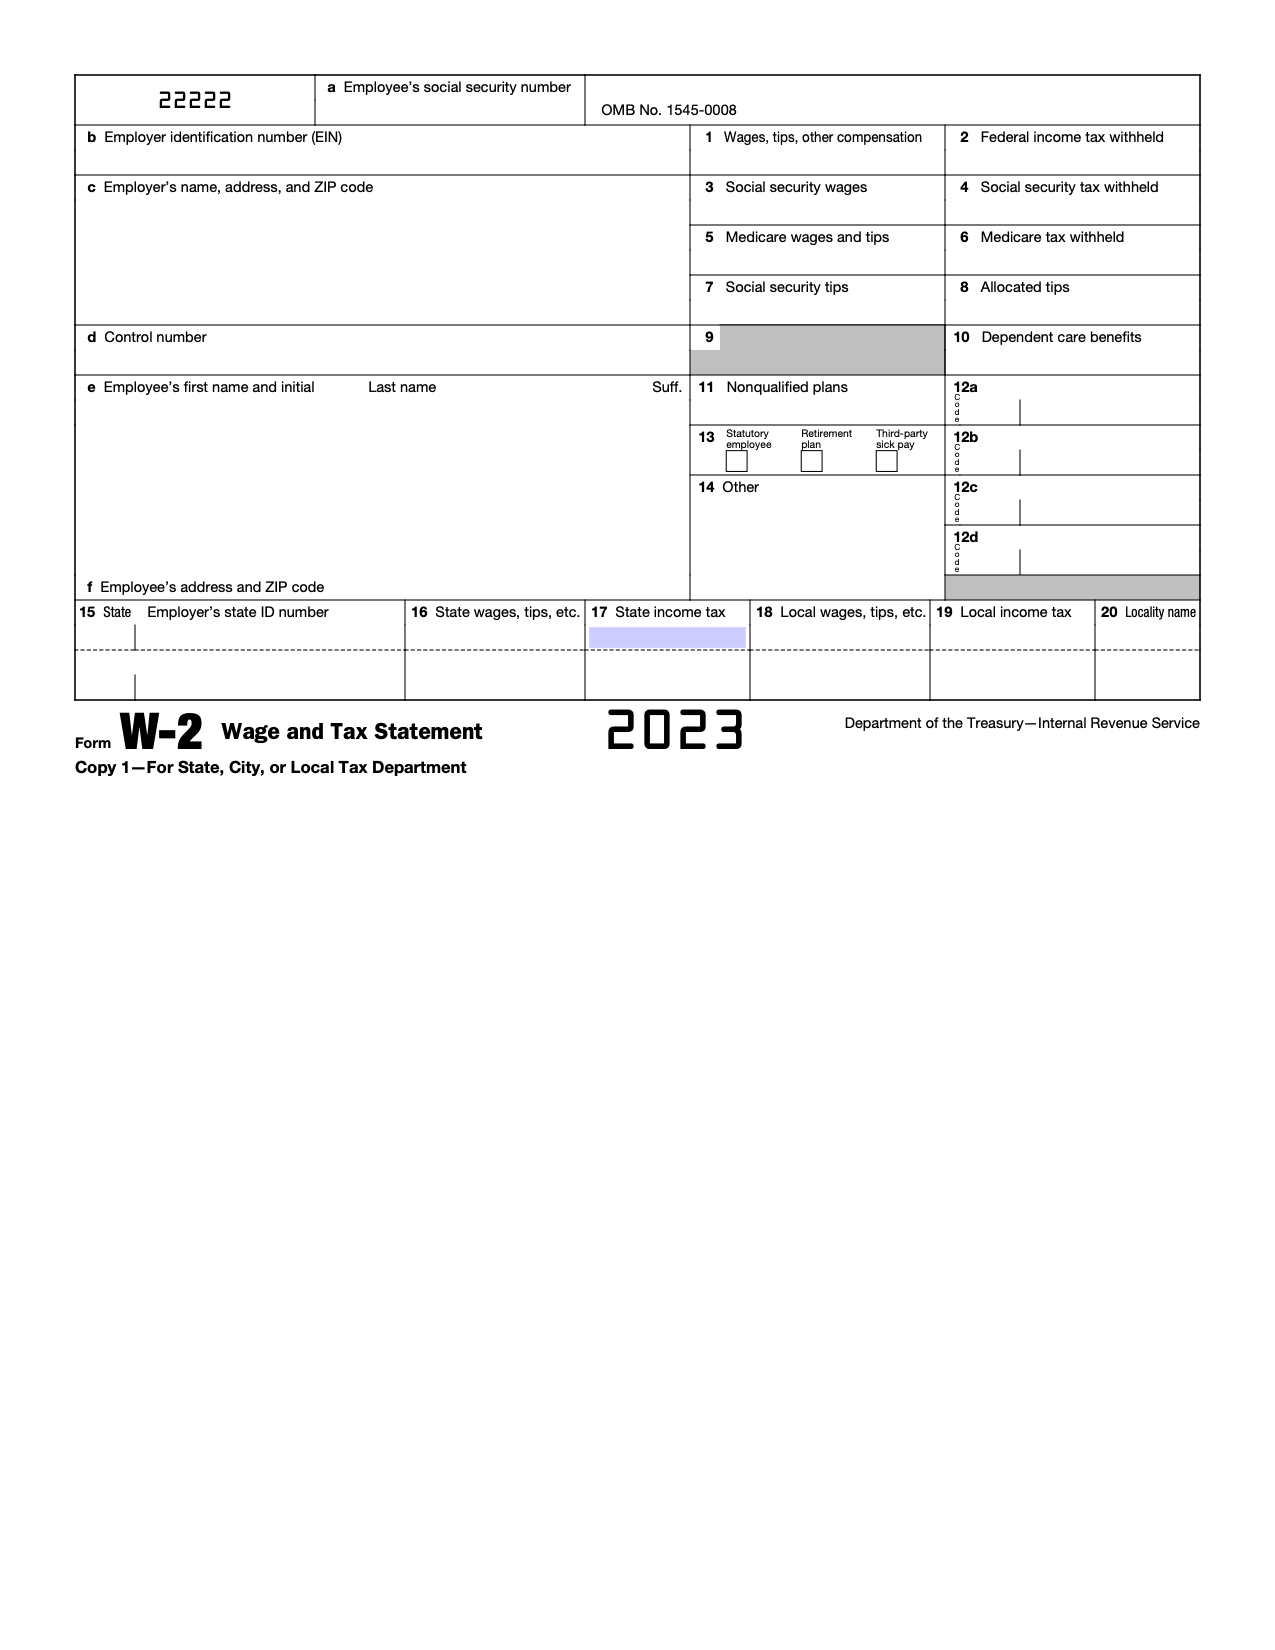 Free Irs Form W-2 | Wage And Tax Statement - Pdf – Eforms with regard to 2023 W2 Form Printable